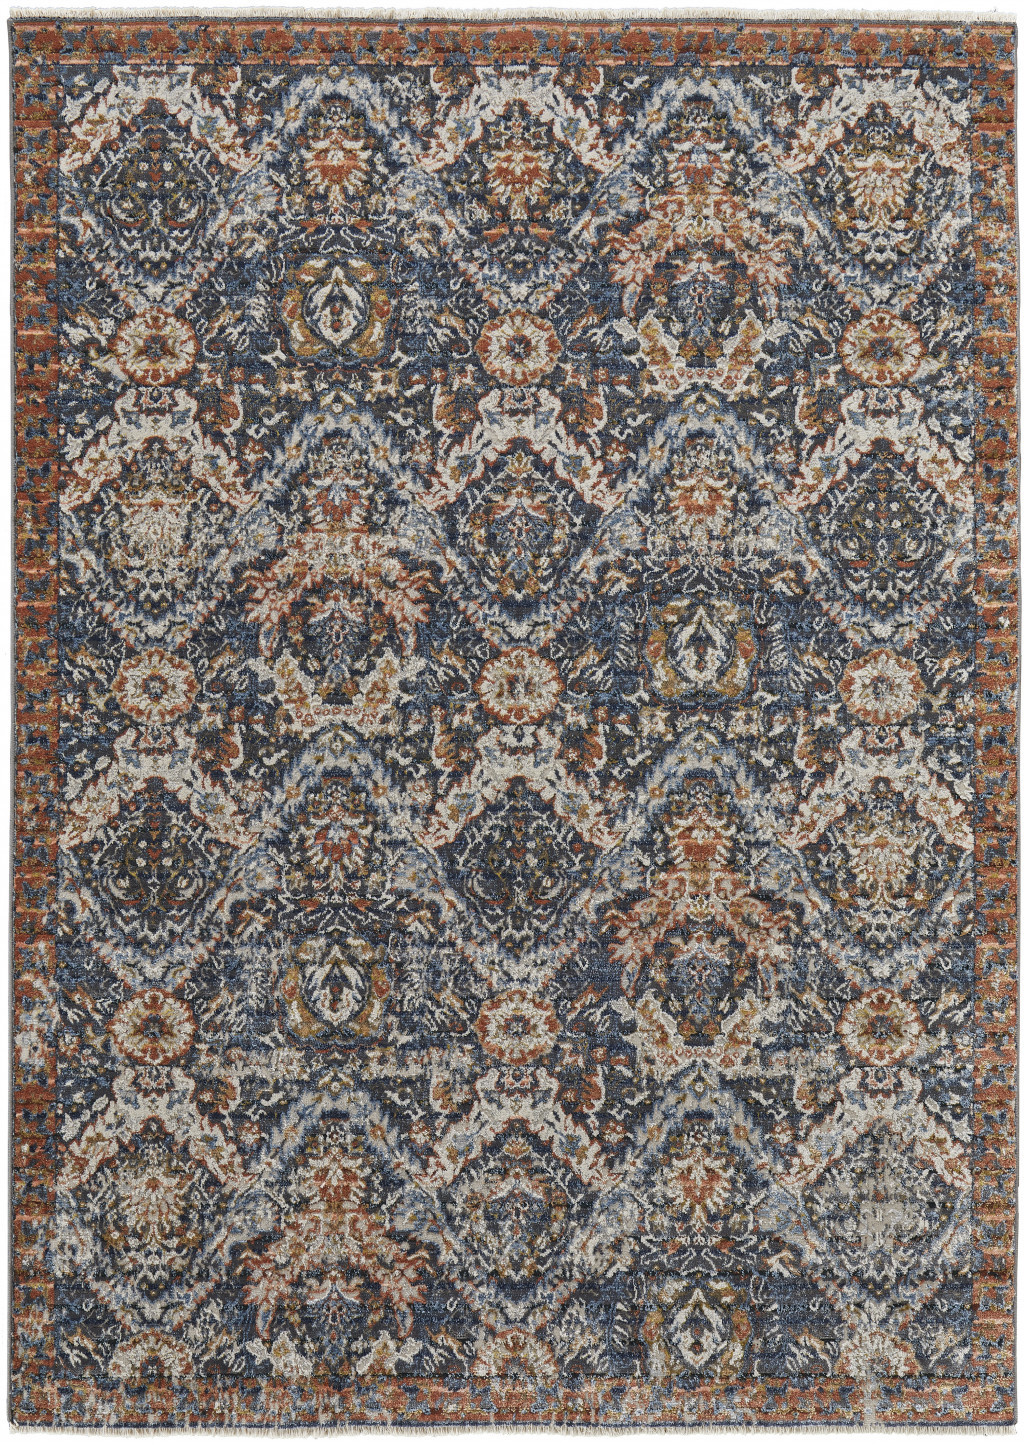 8' X 10' Blue Orange And Ivory Floral Power Loom Area Rug With Fringe-513991-1